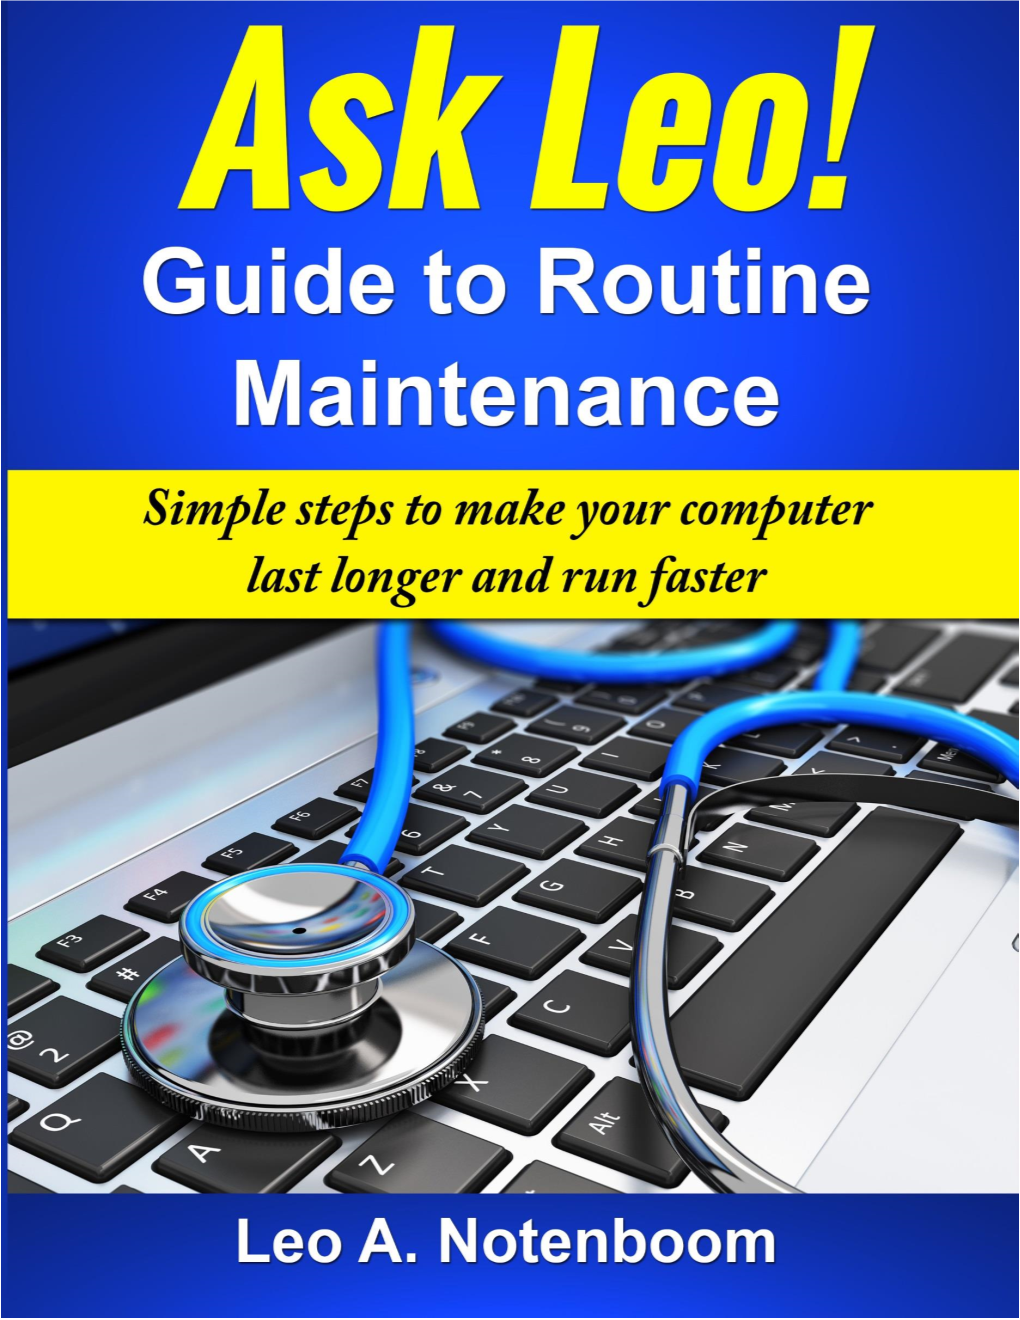 The Ask Leo! ® Guide to Routine Maintenance 2 Contents the Ask Leo! Manifesto